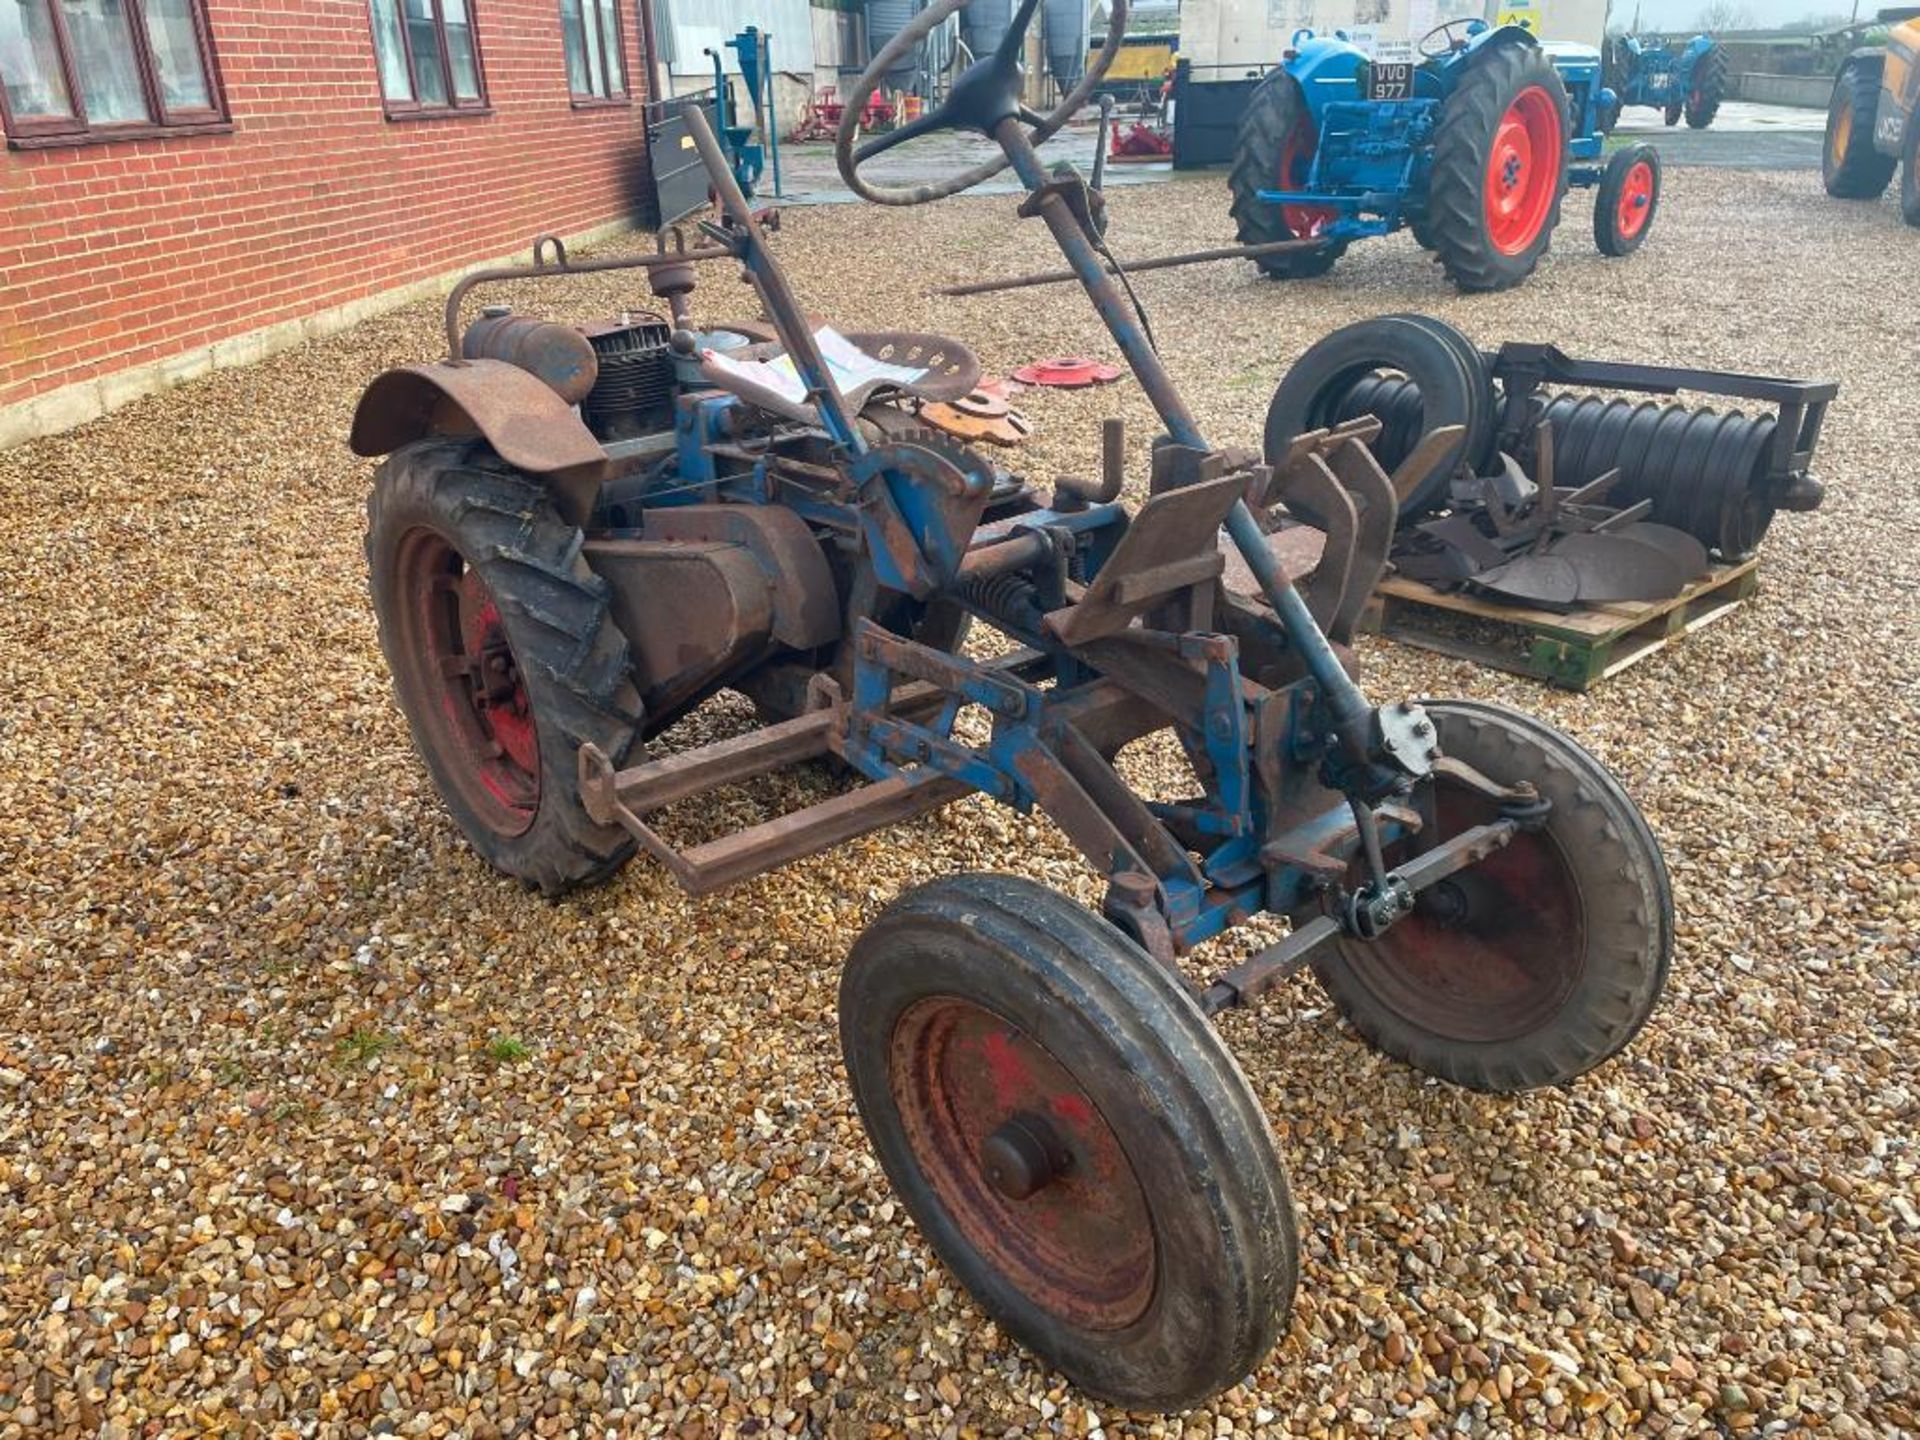 1949 Garner Light Tractor 2wd petrol tractor with JAP Model S air cooled engine on 7.50-16 front and - Image 8 of 19